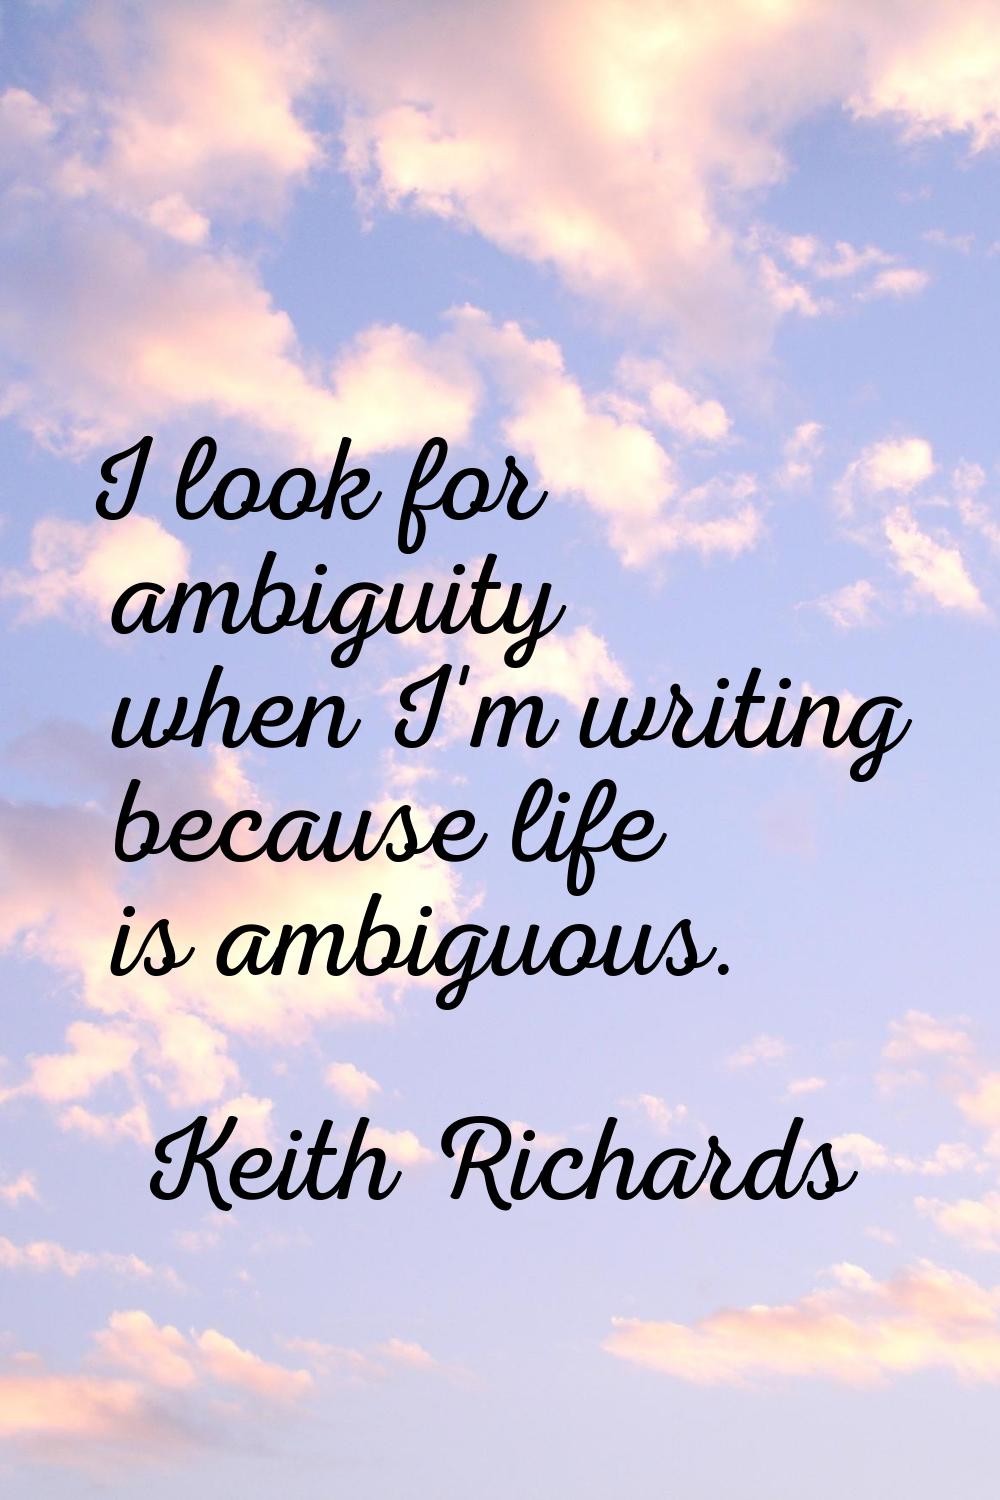 I look for ambiguity when I'm writing because life is ambiguous.